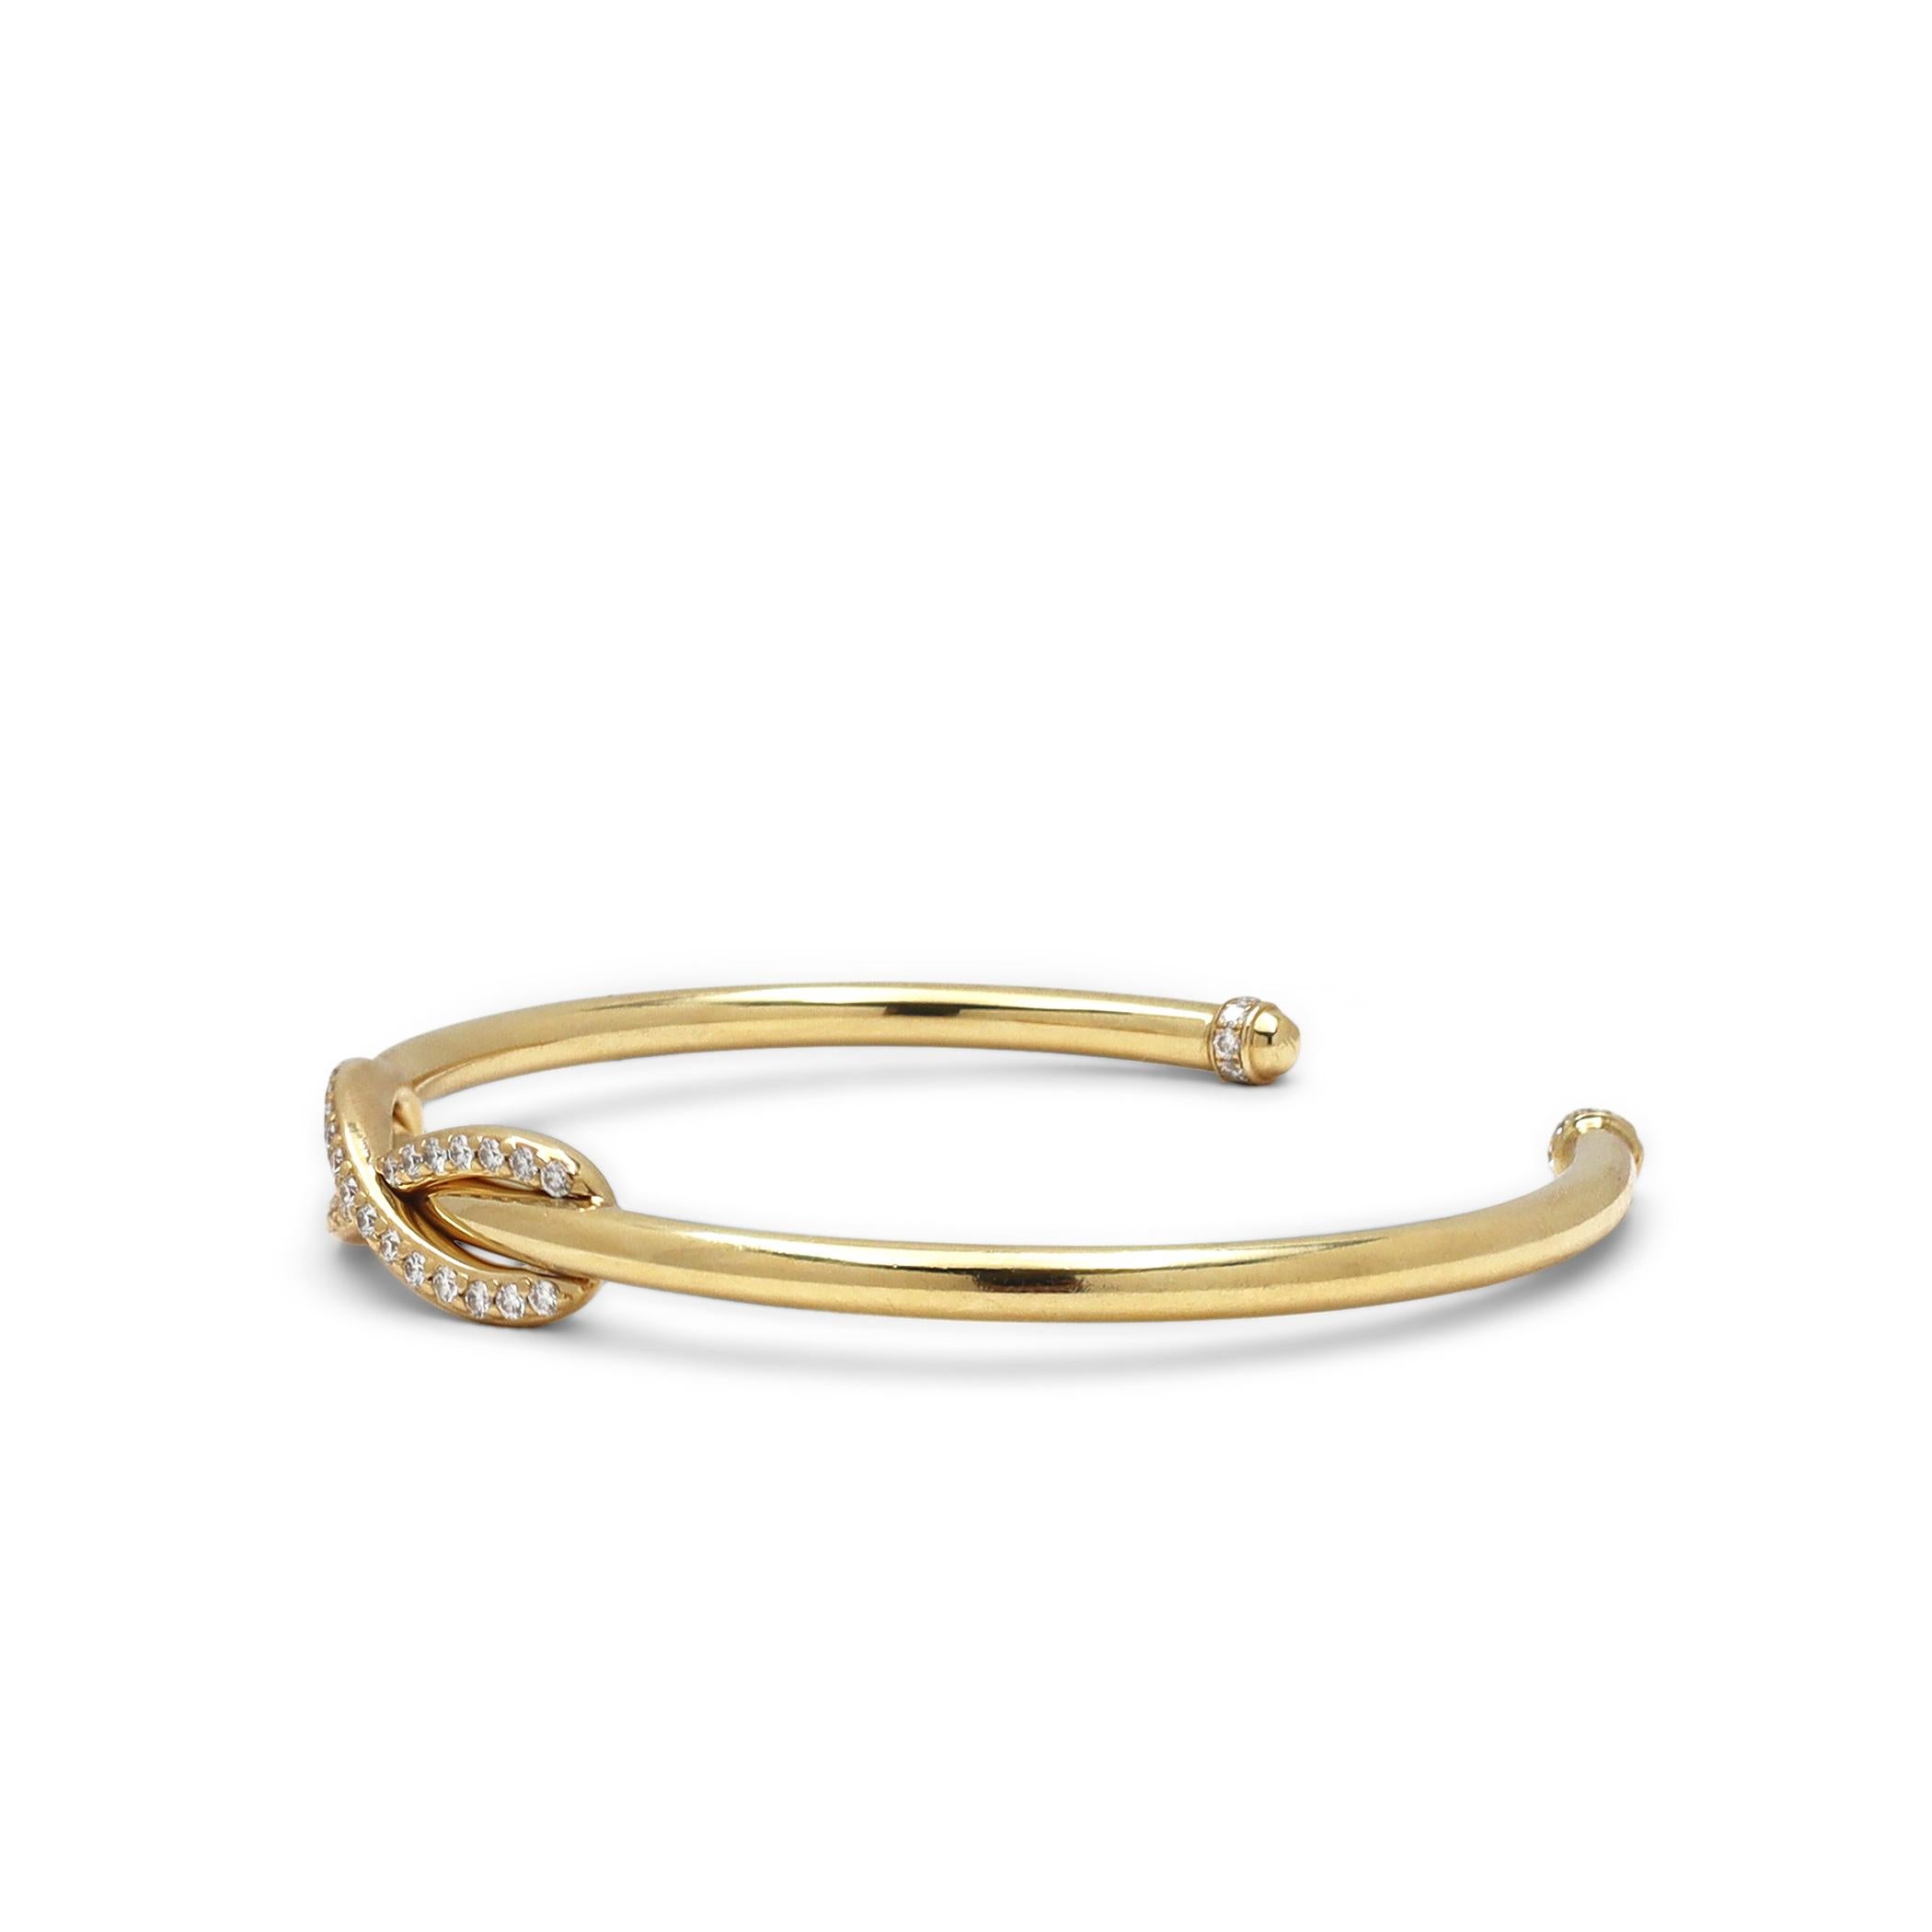 Authentic Tiffany & Co. 'Infinity' cuff bracelet crafted in 18 karat yellow gold.  A single infinity motif set with an estimated .30 carats of round brilliant cut diamonds encircles the bracelet at its center.  Each domed end is set with an